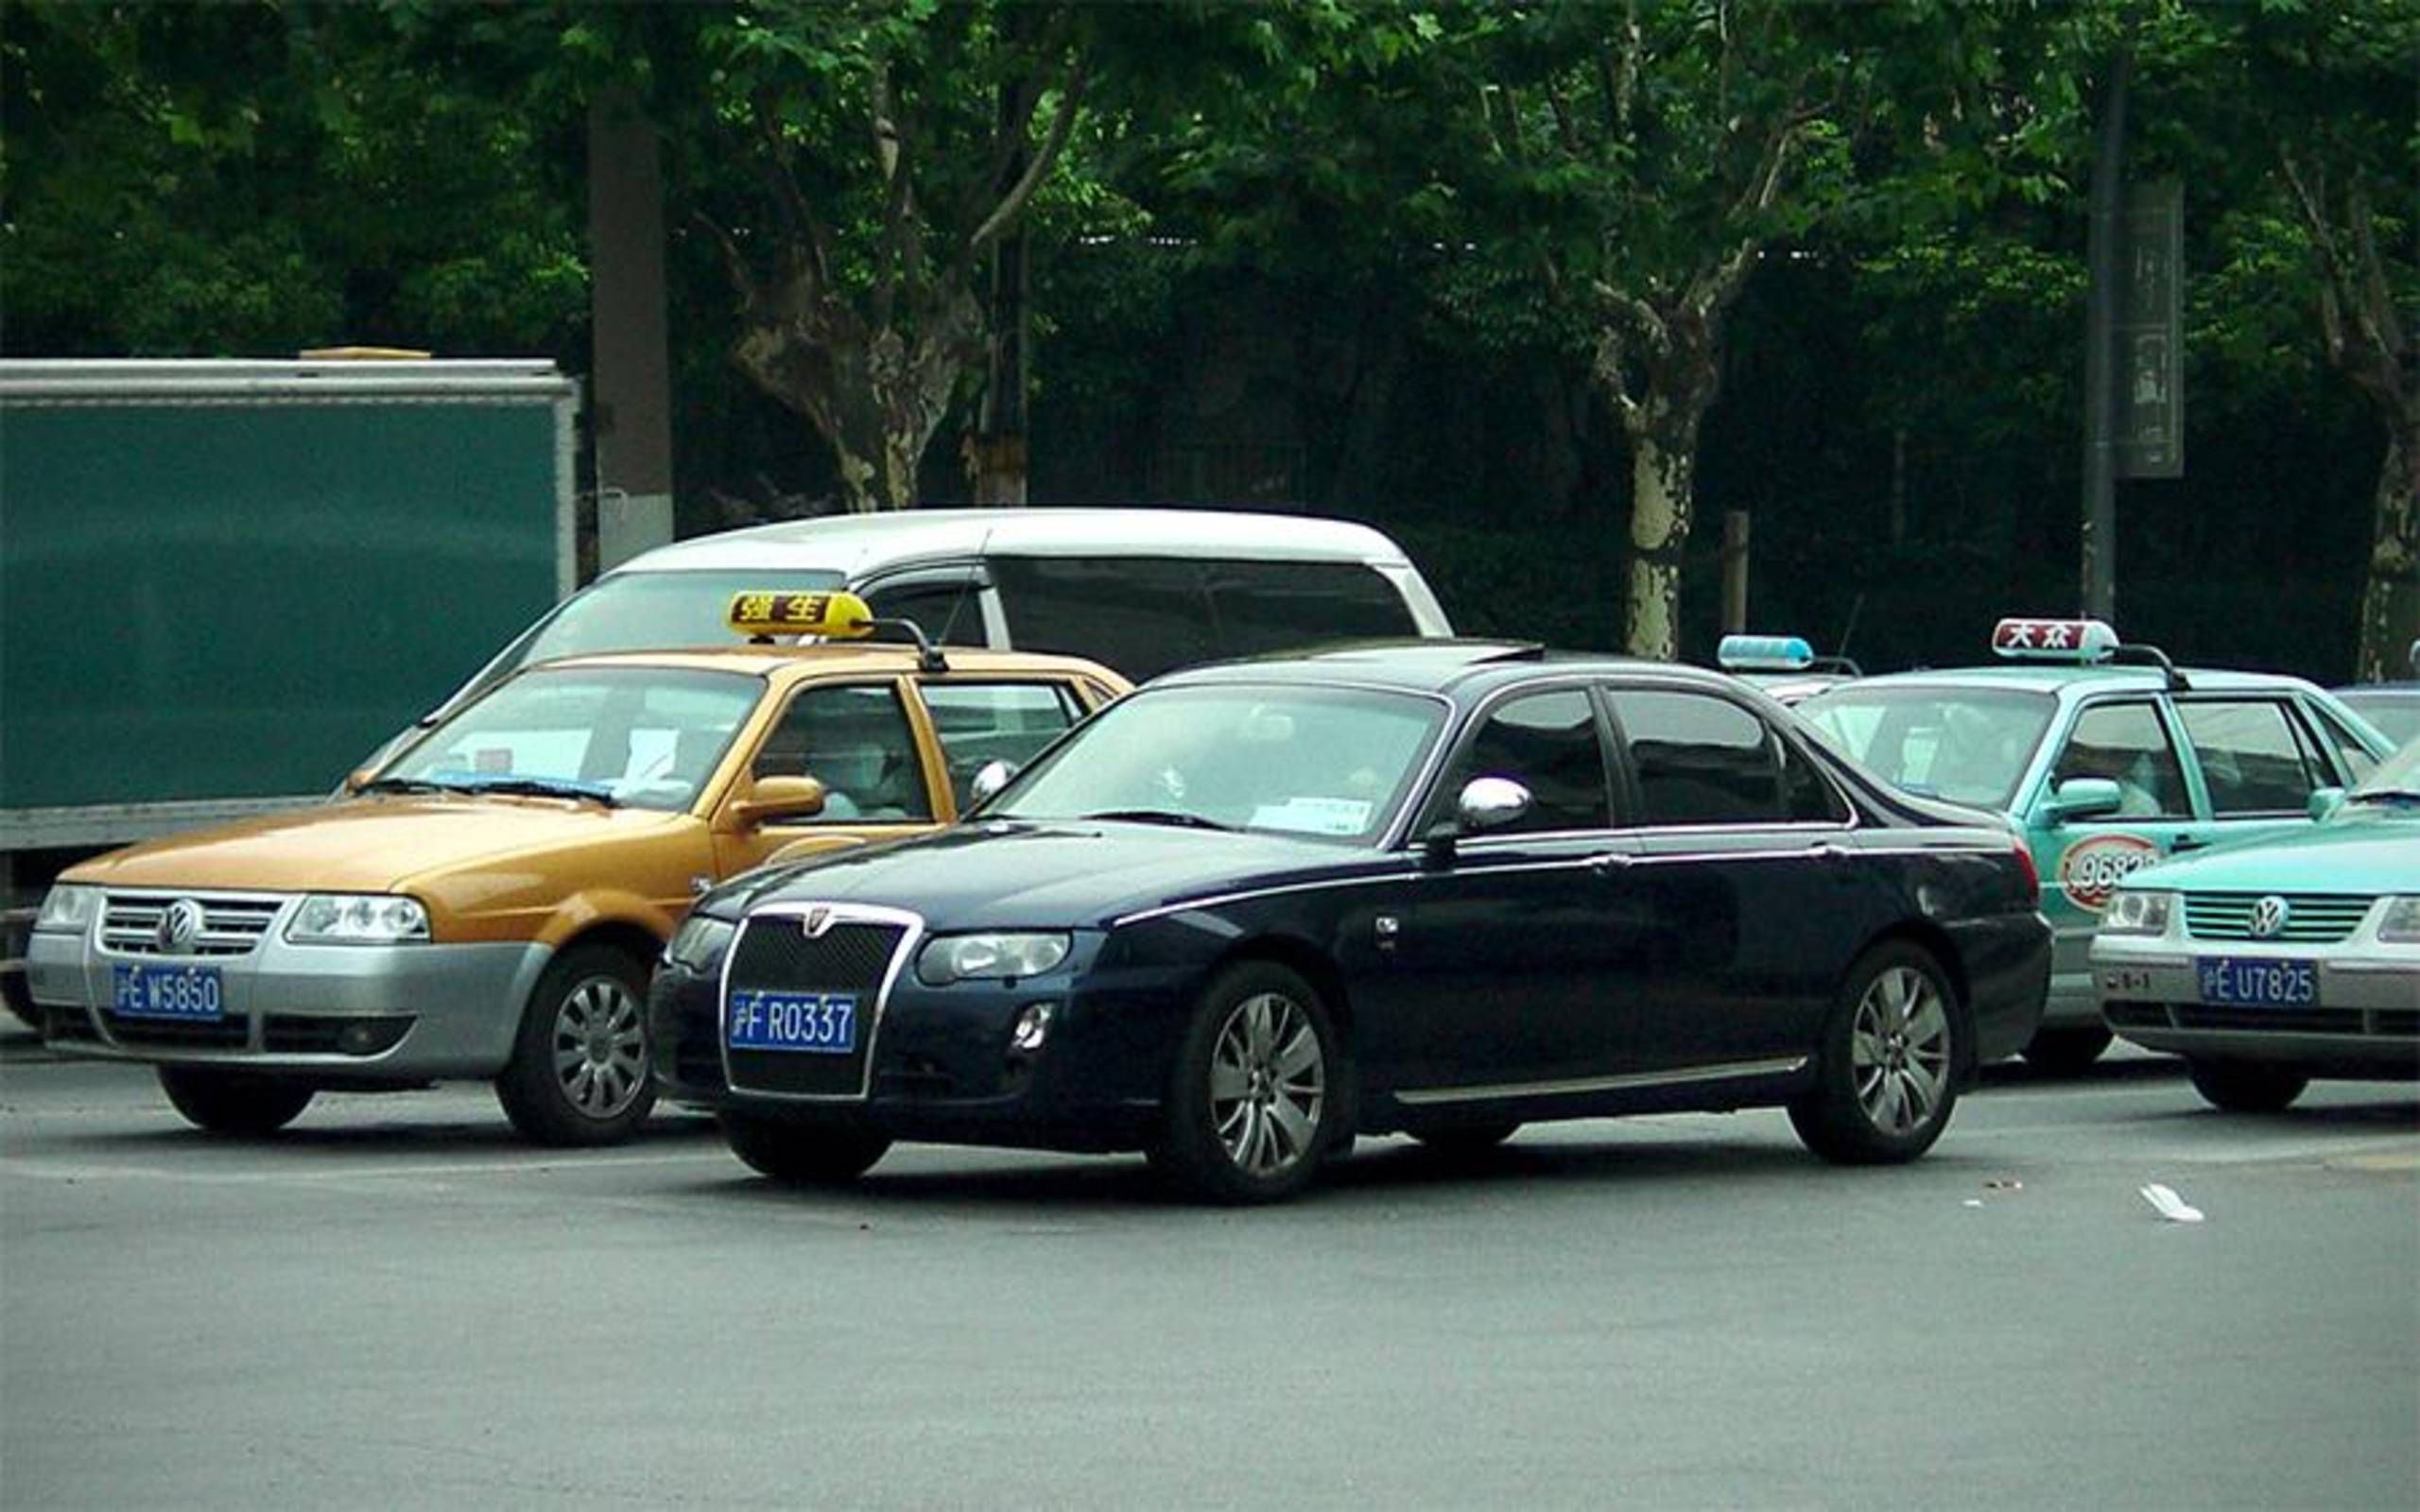 License plate lottery in China aims to curb congestion